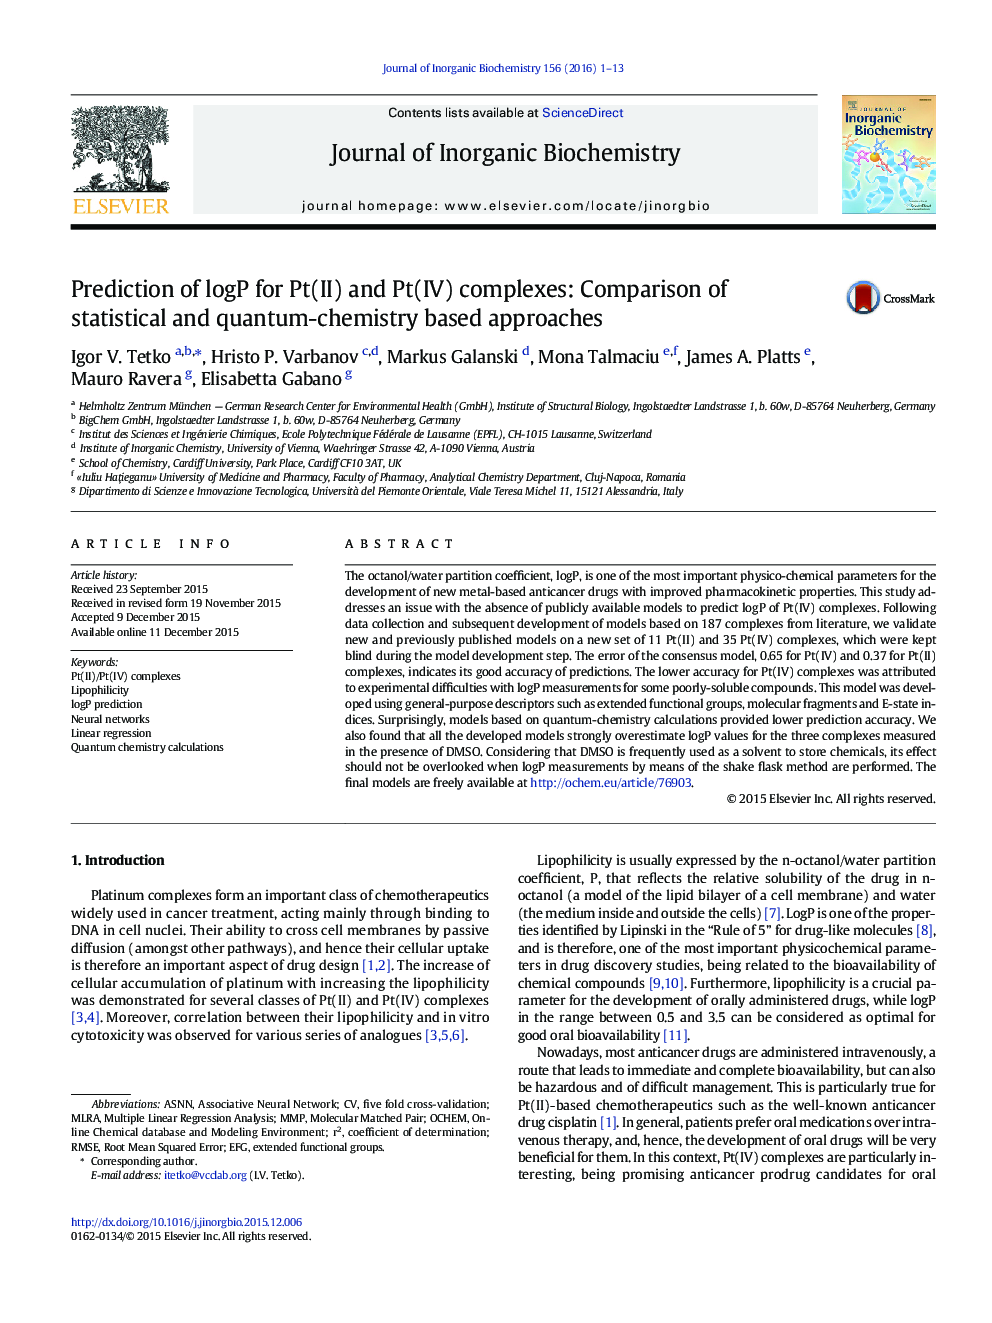 Prediction of logP for Pt(II) and Pt(IV) complexes: Comparison of statistical and quantum-chemistry based approaches